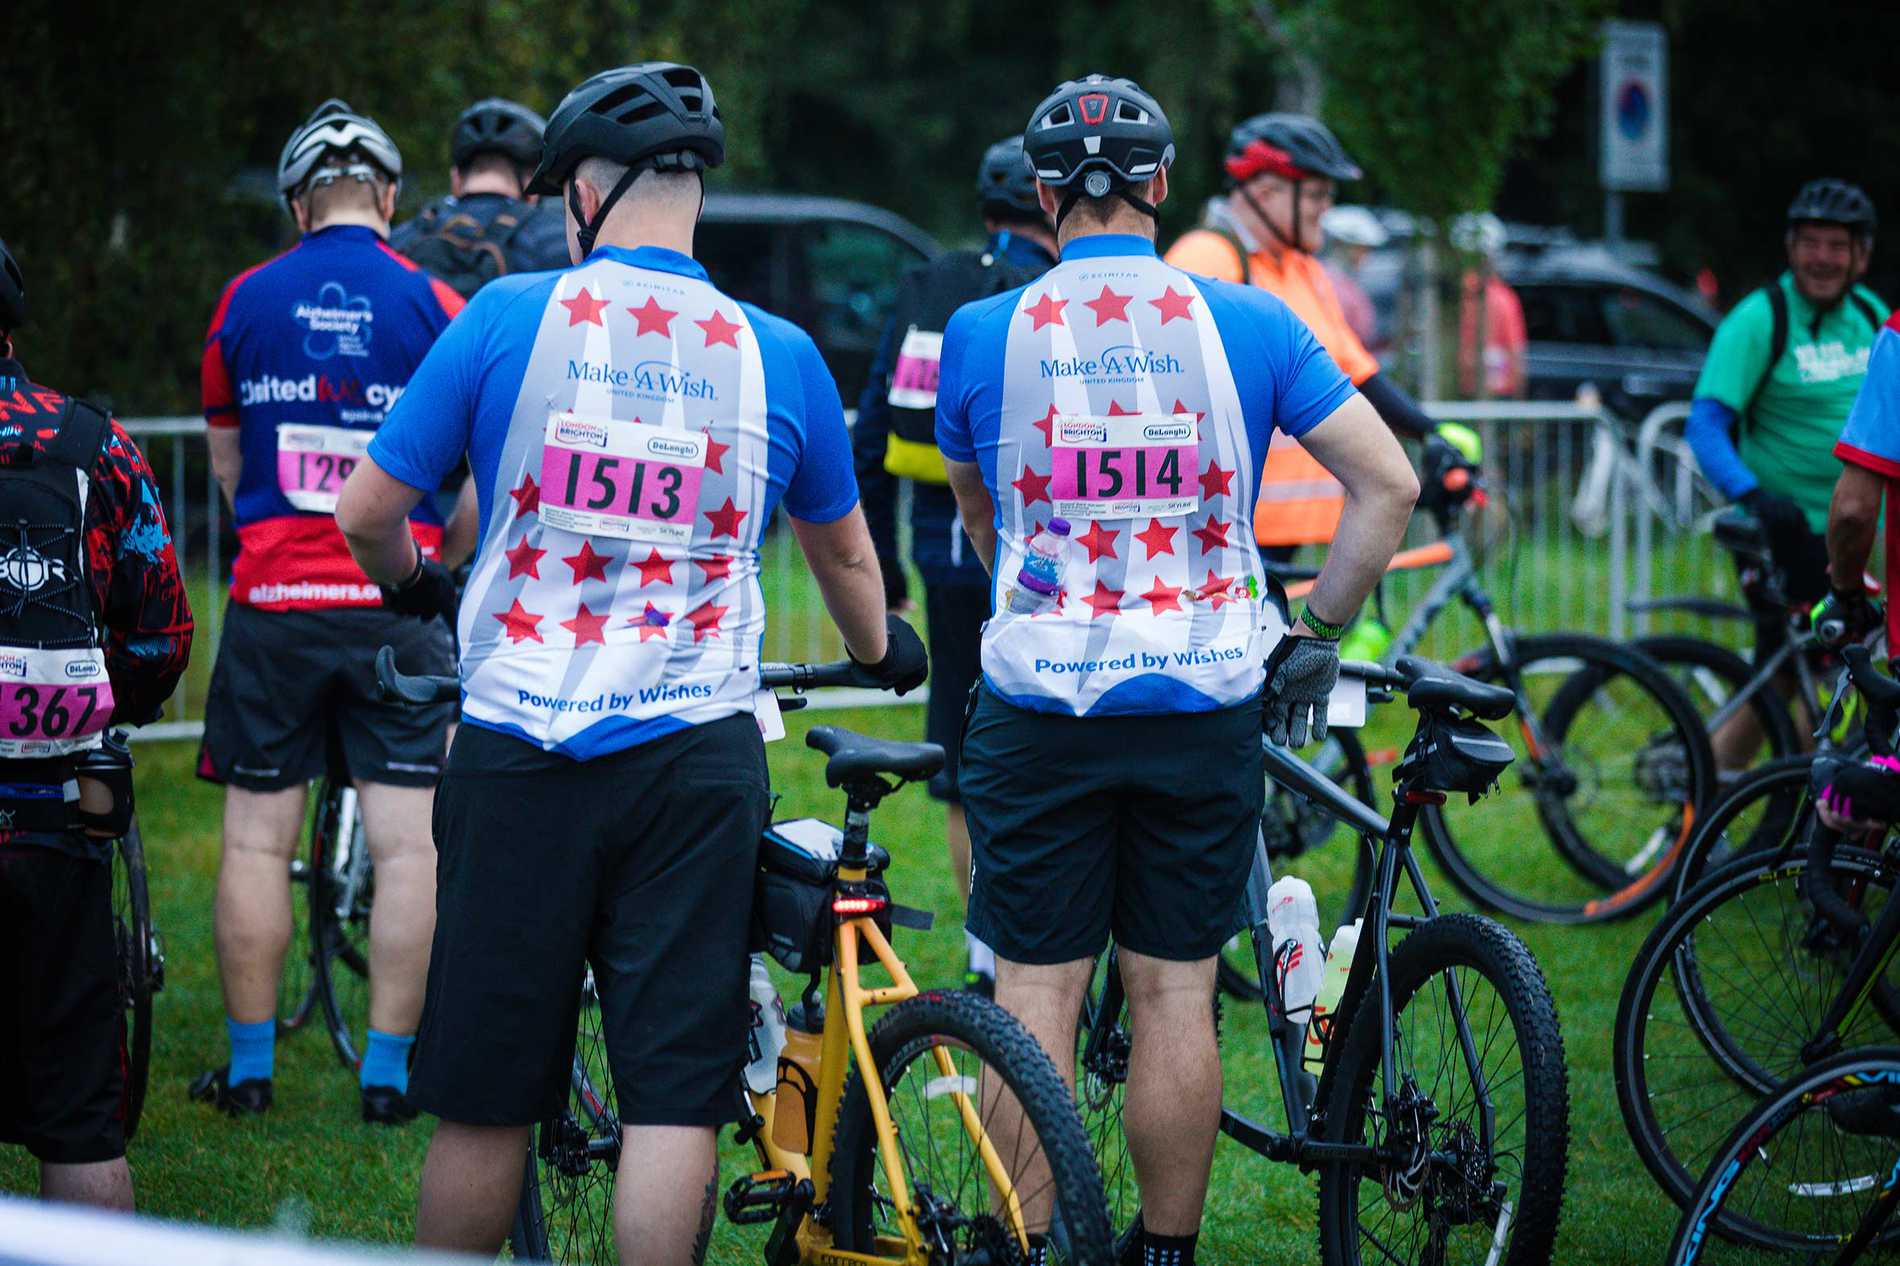 A rear view of two #WishHeroes getting ready to take part in the 2021 London to Brighton Cycle challenge.